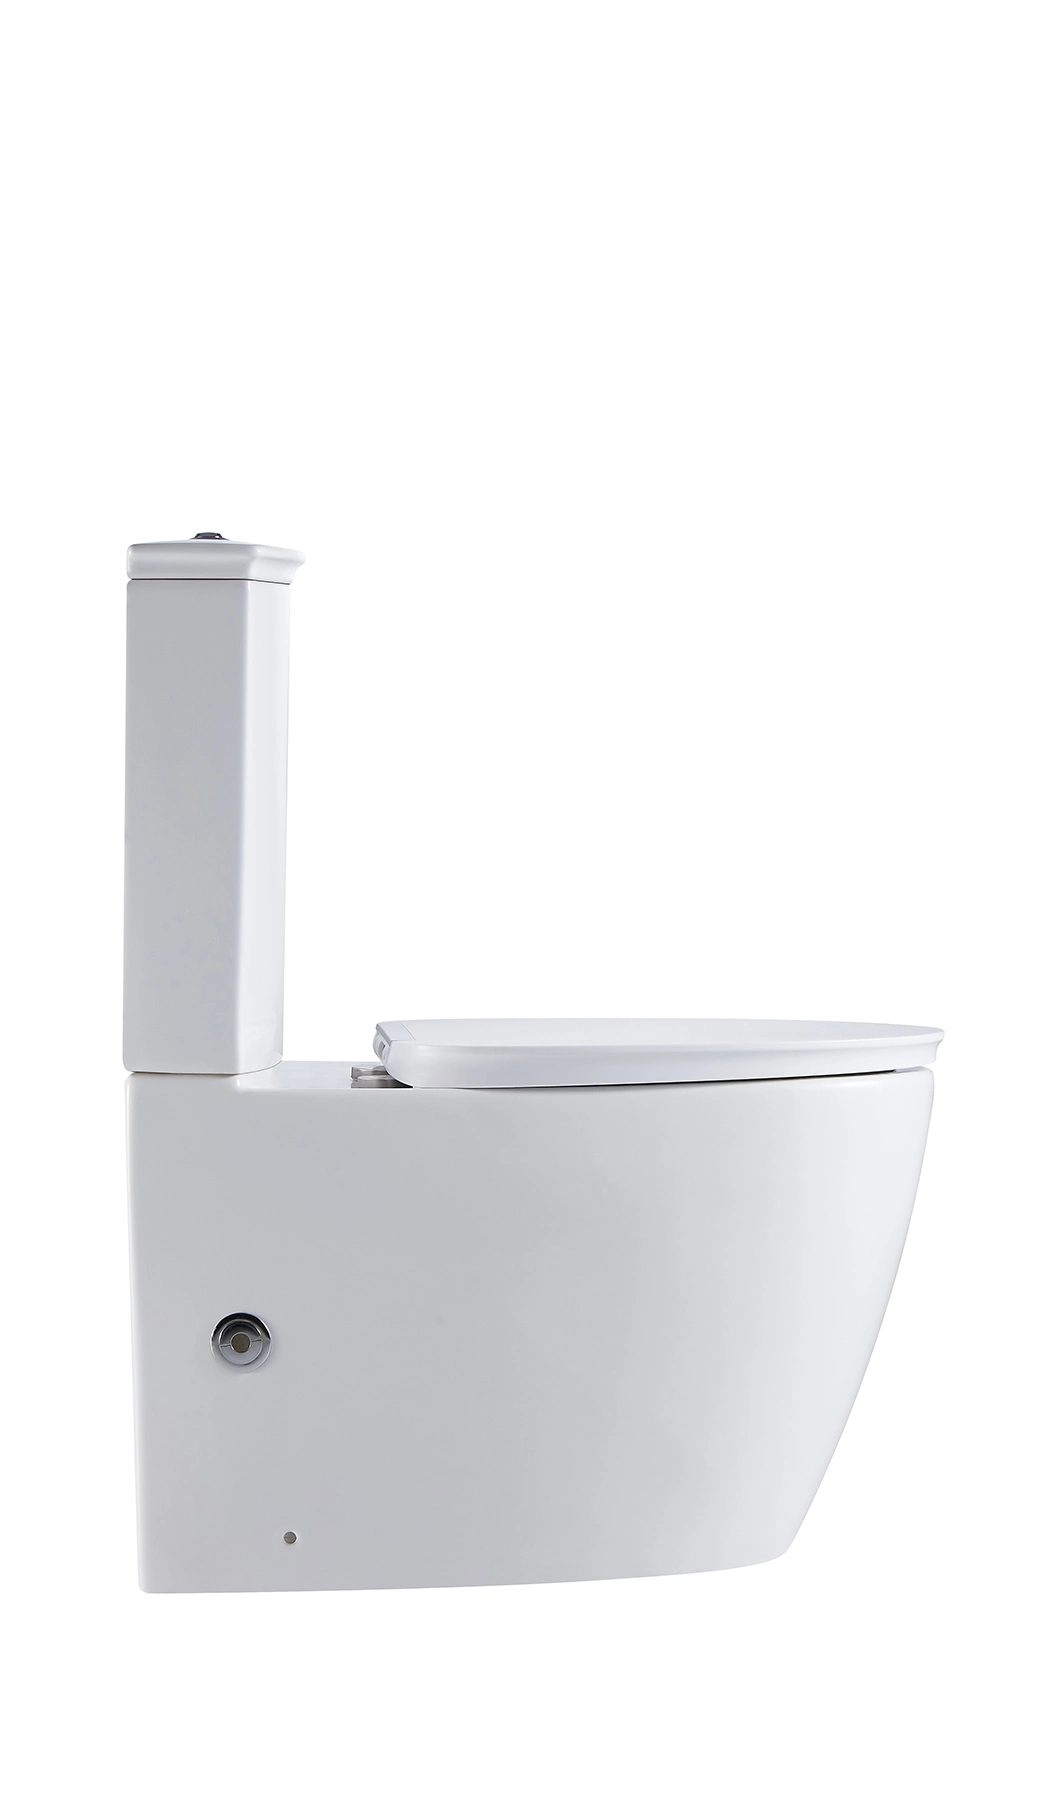 Tornade Bathroom Accessory Flushing Toilets Suites Sanitary Ware Water Closet Toilet